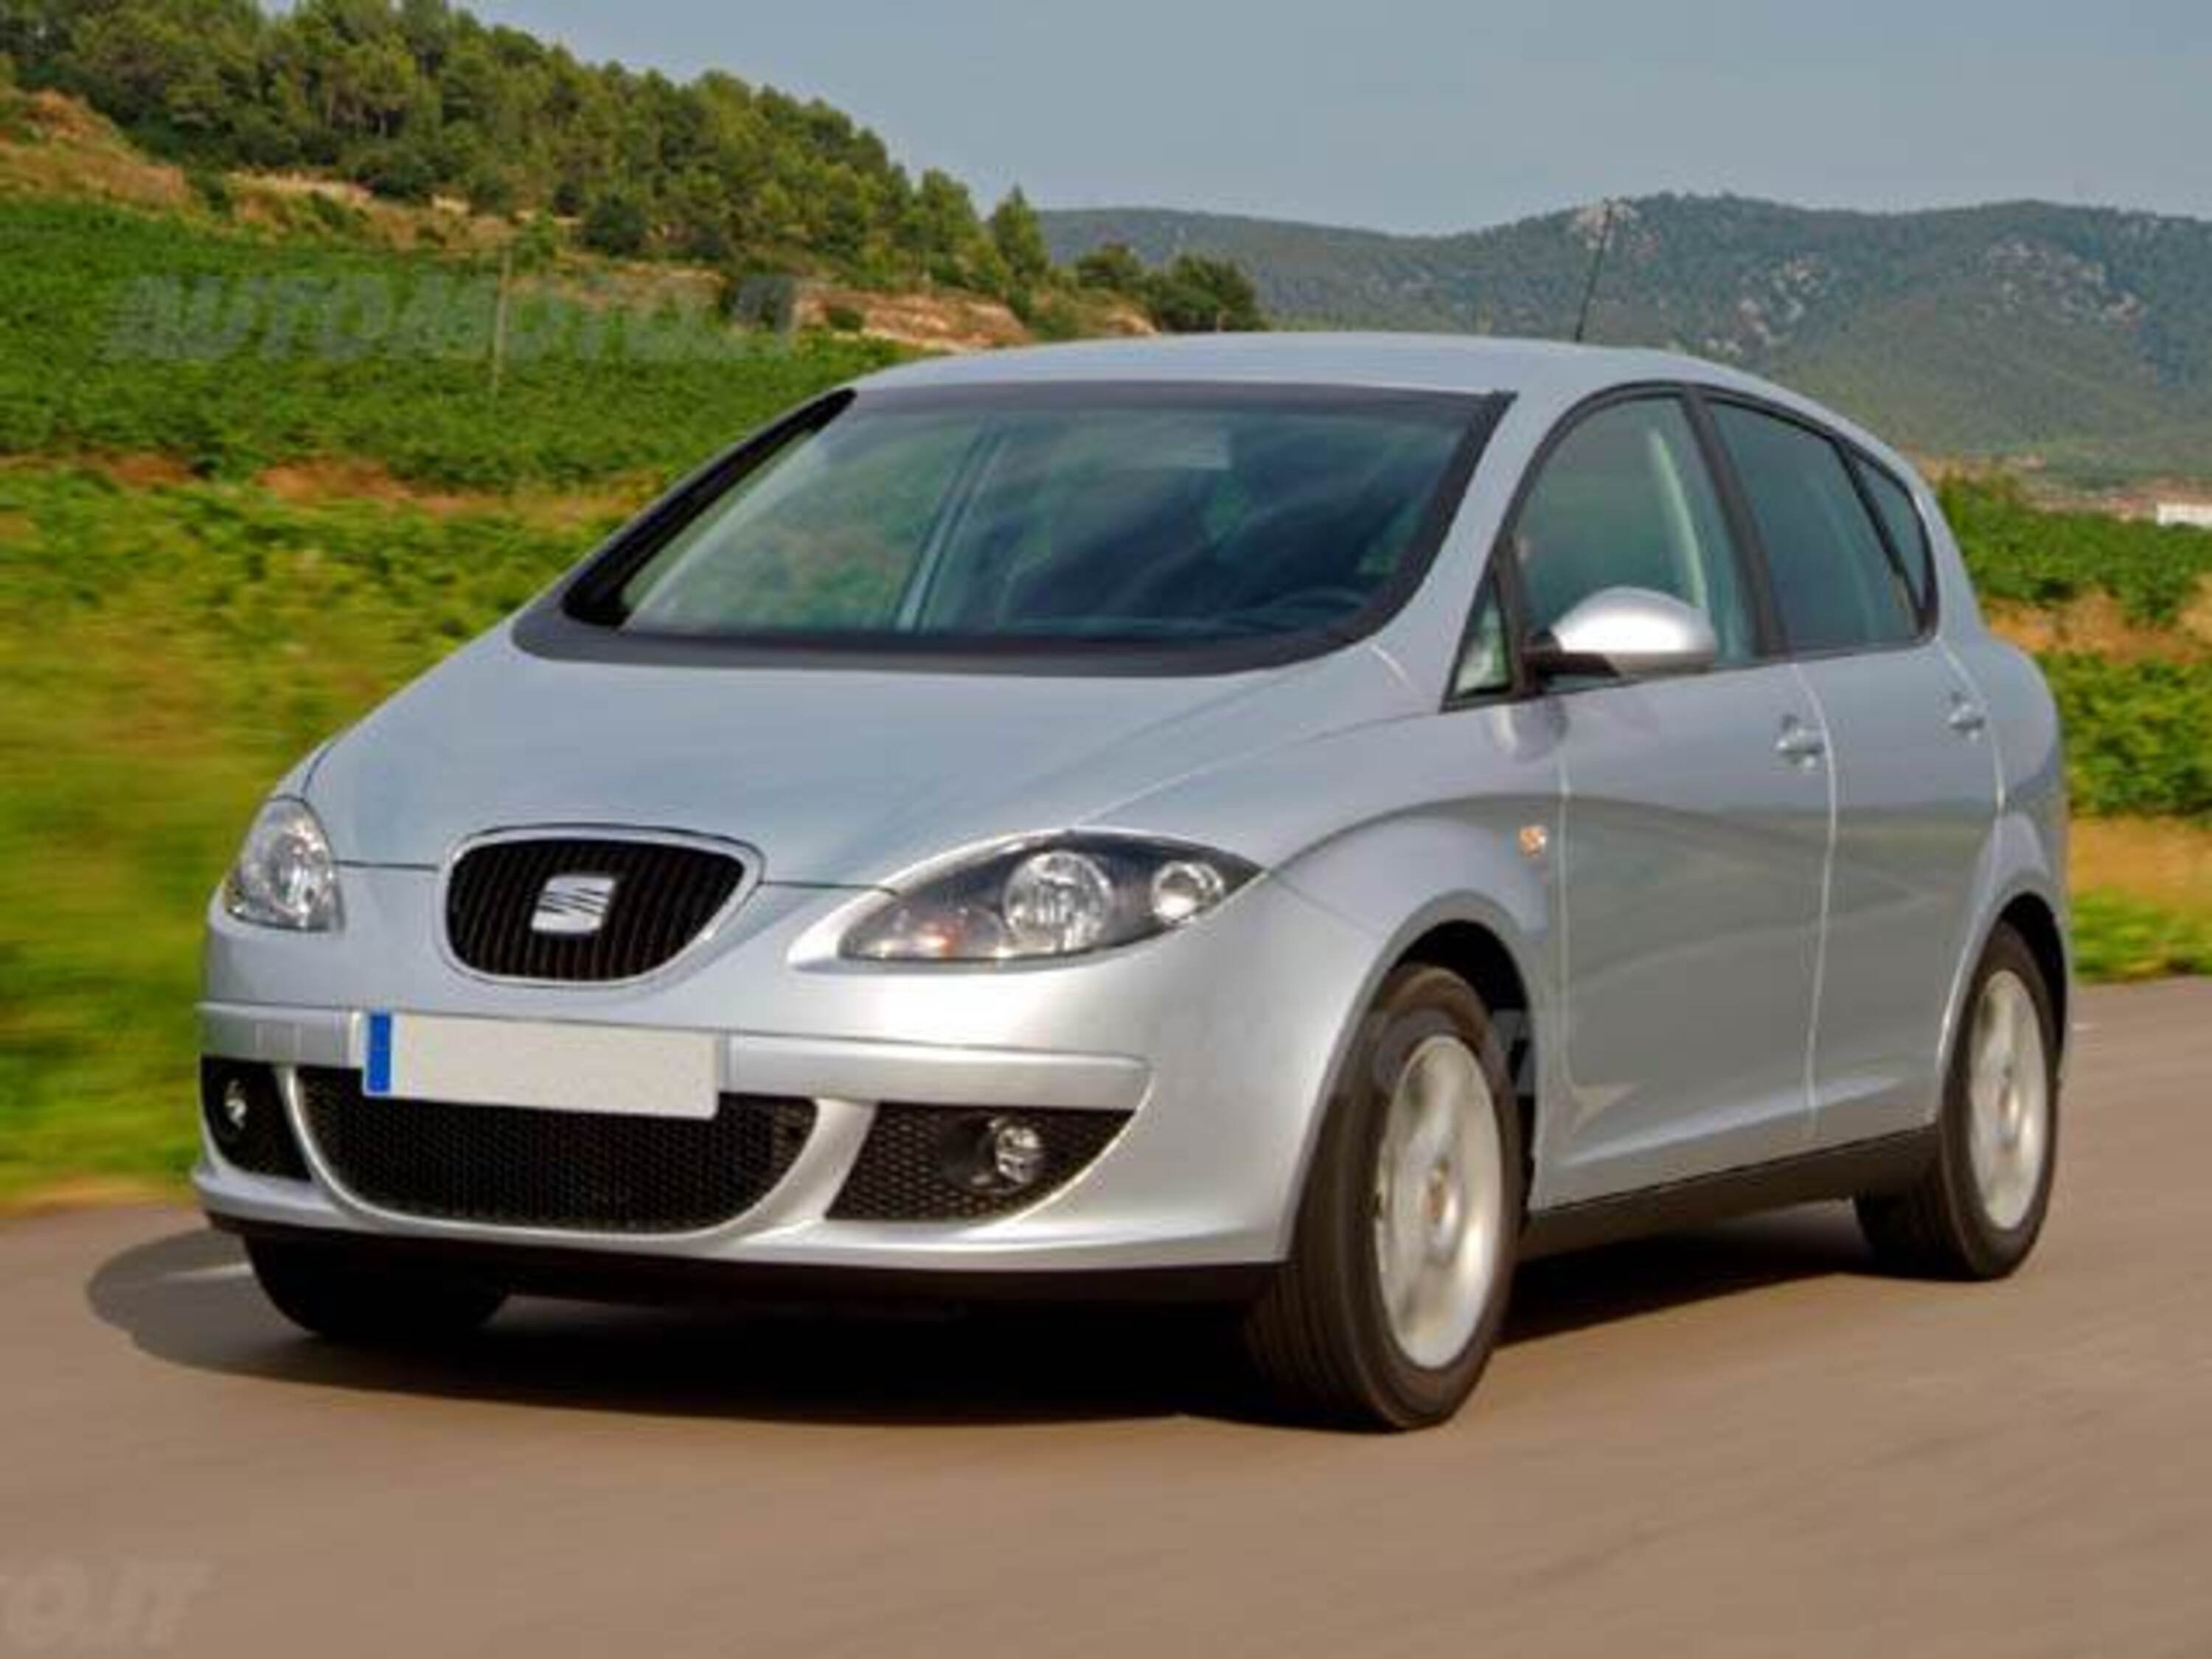 SEAT Toledo 1.6 Reference Dual my 06